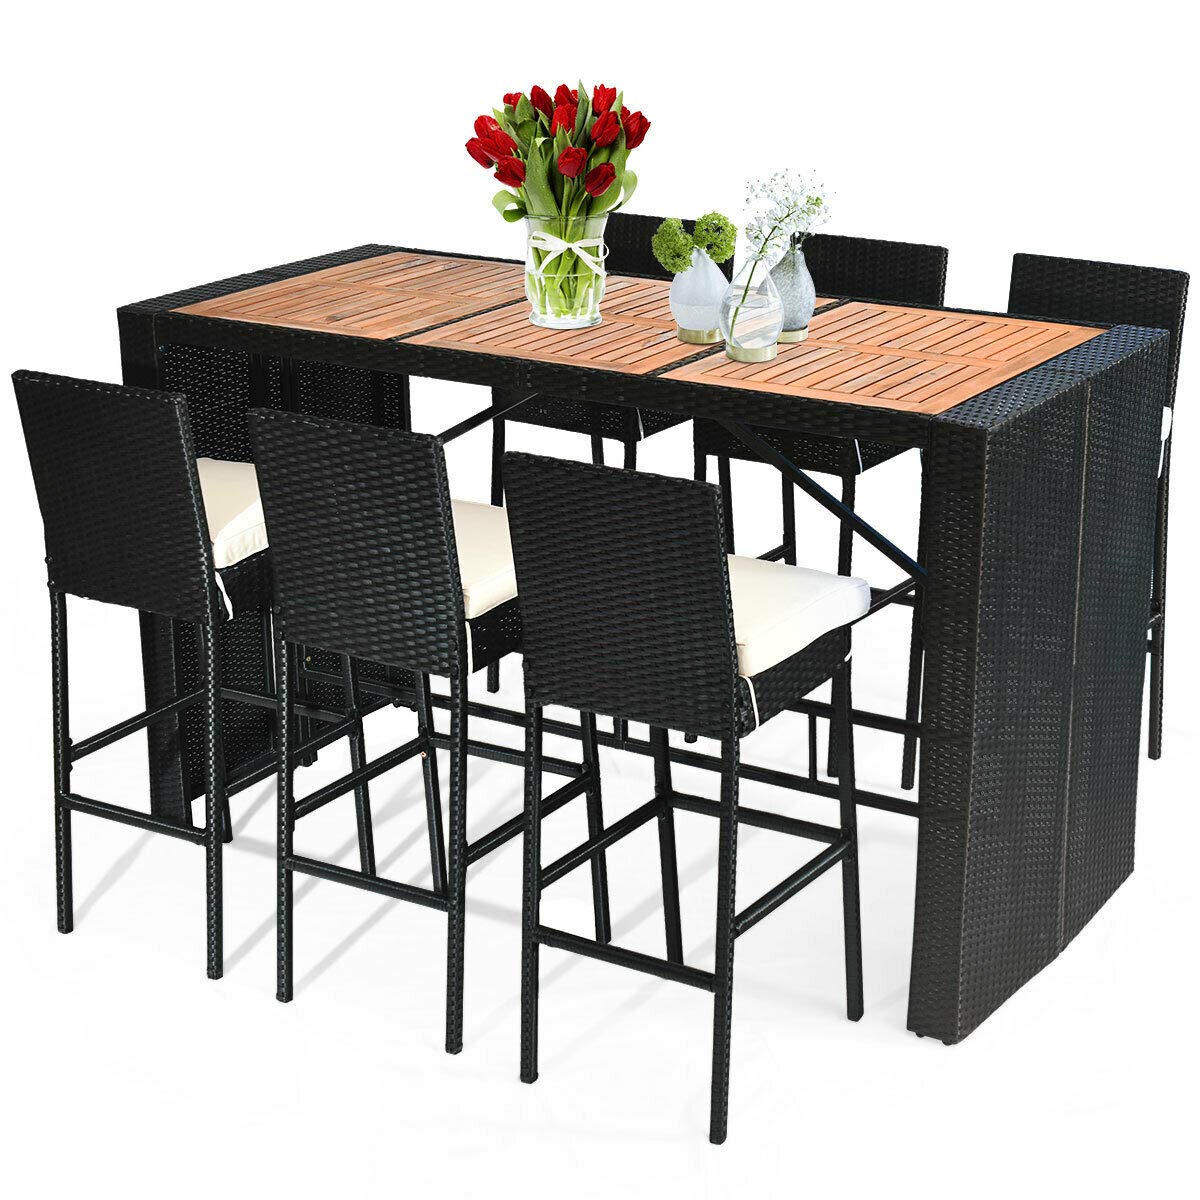 7 PCS Outdoor Dining Set, Patio Wicker Furniture Set with Acacia Wood Table Top and Removable Cushion